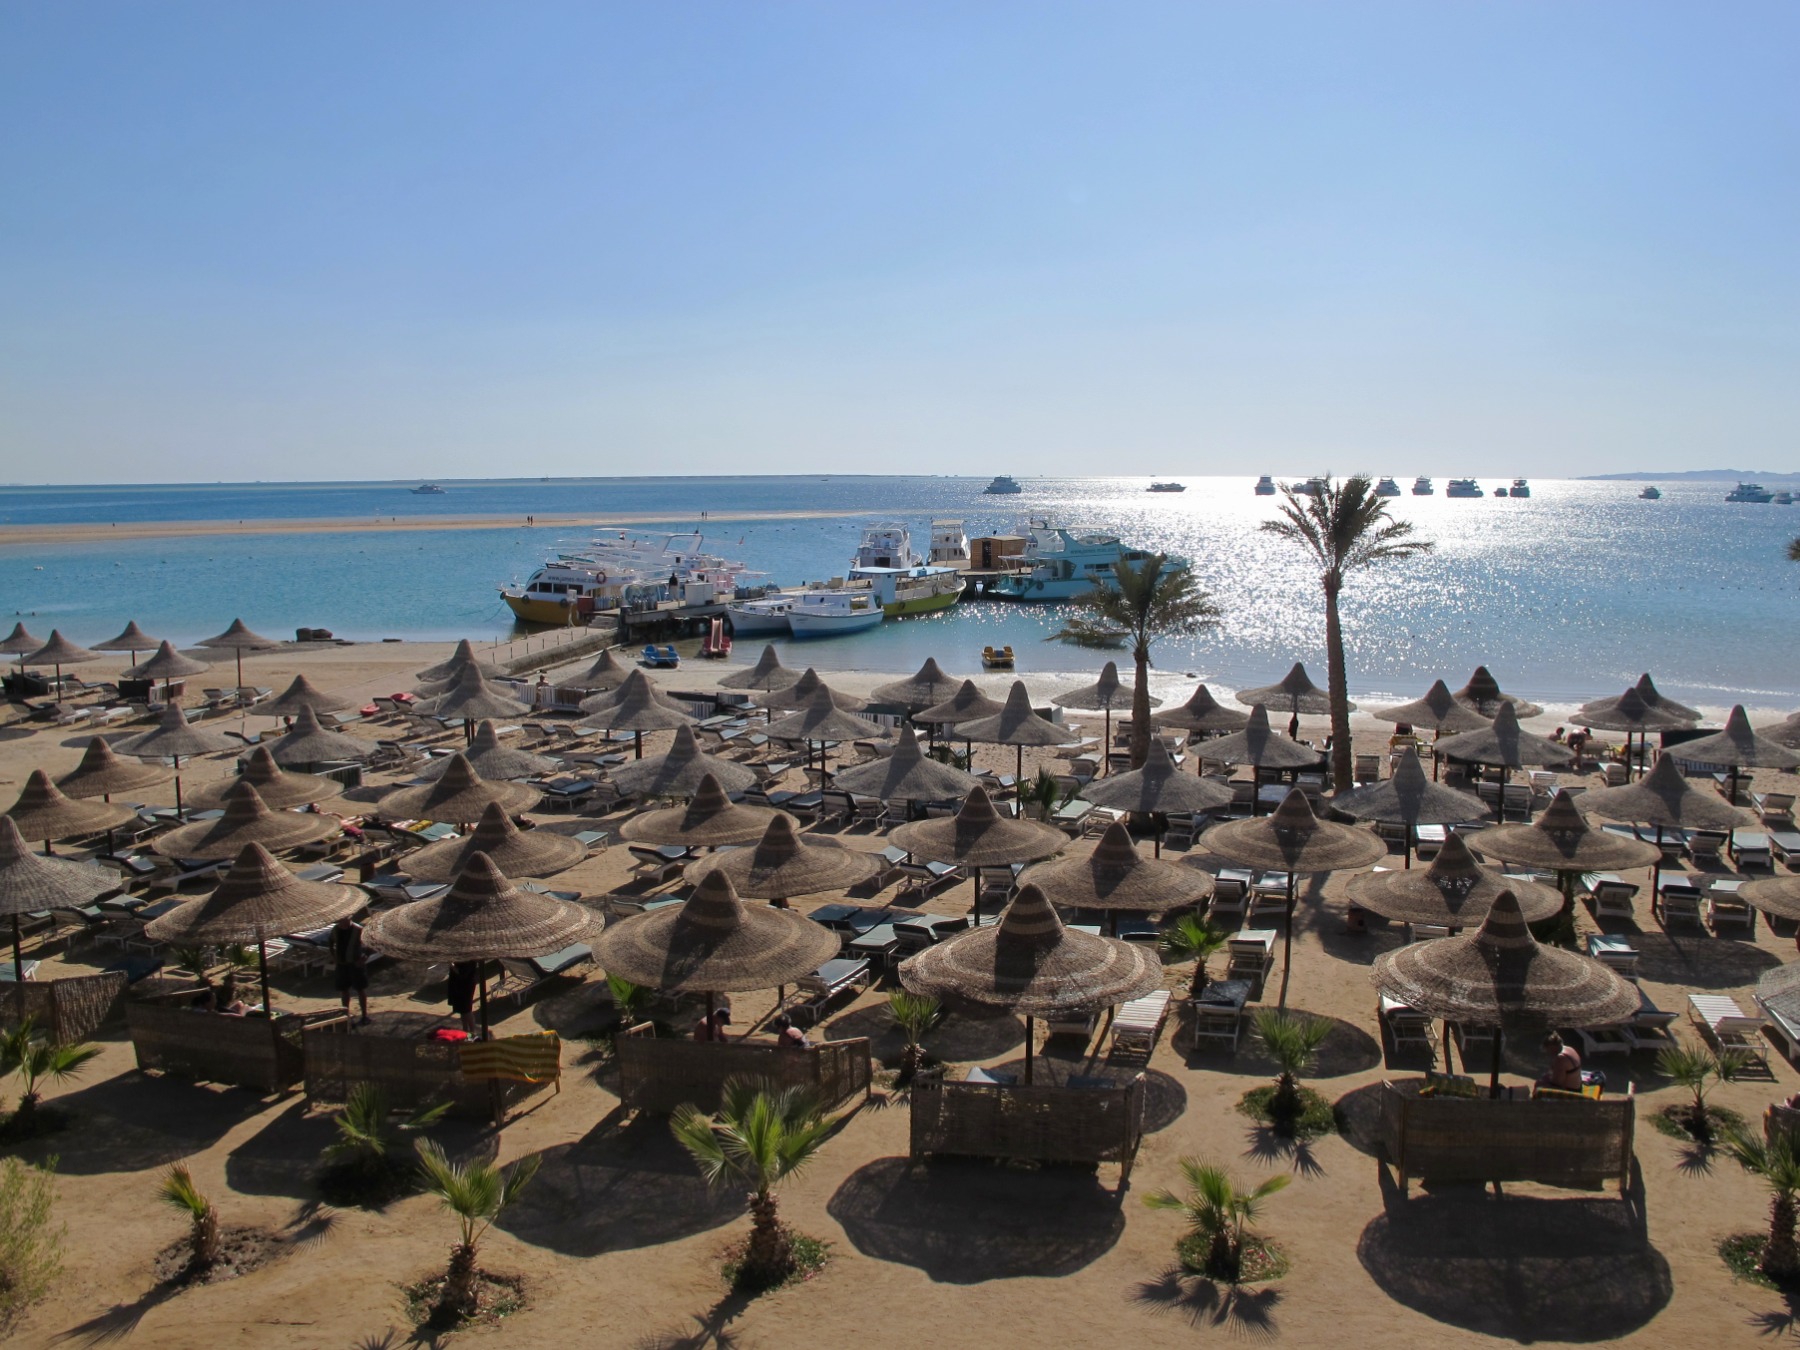 Unsere Frühlingswoche in Hurghada